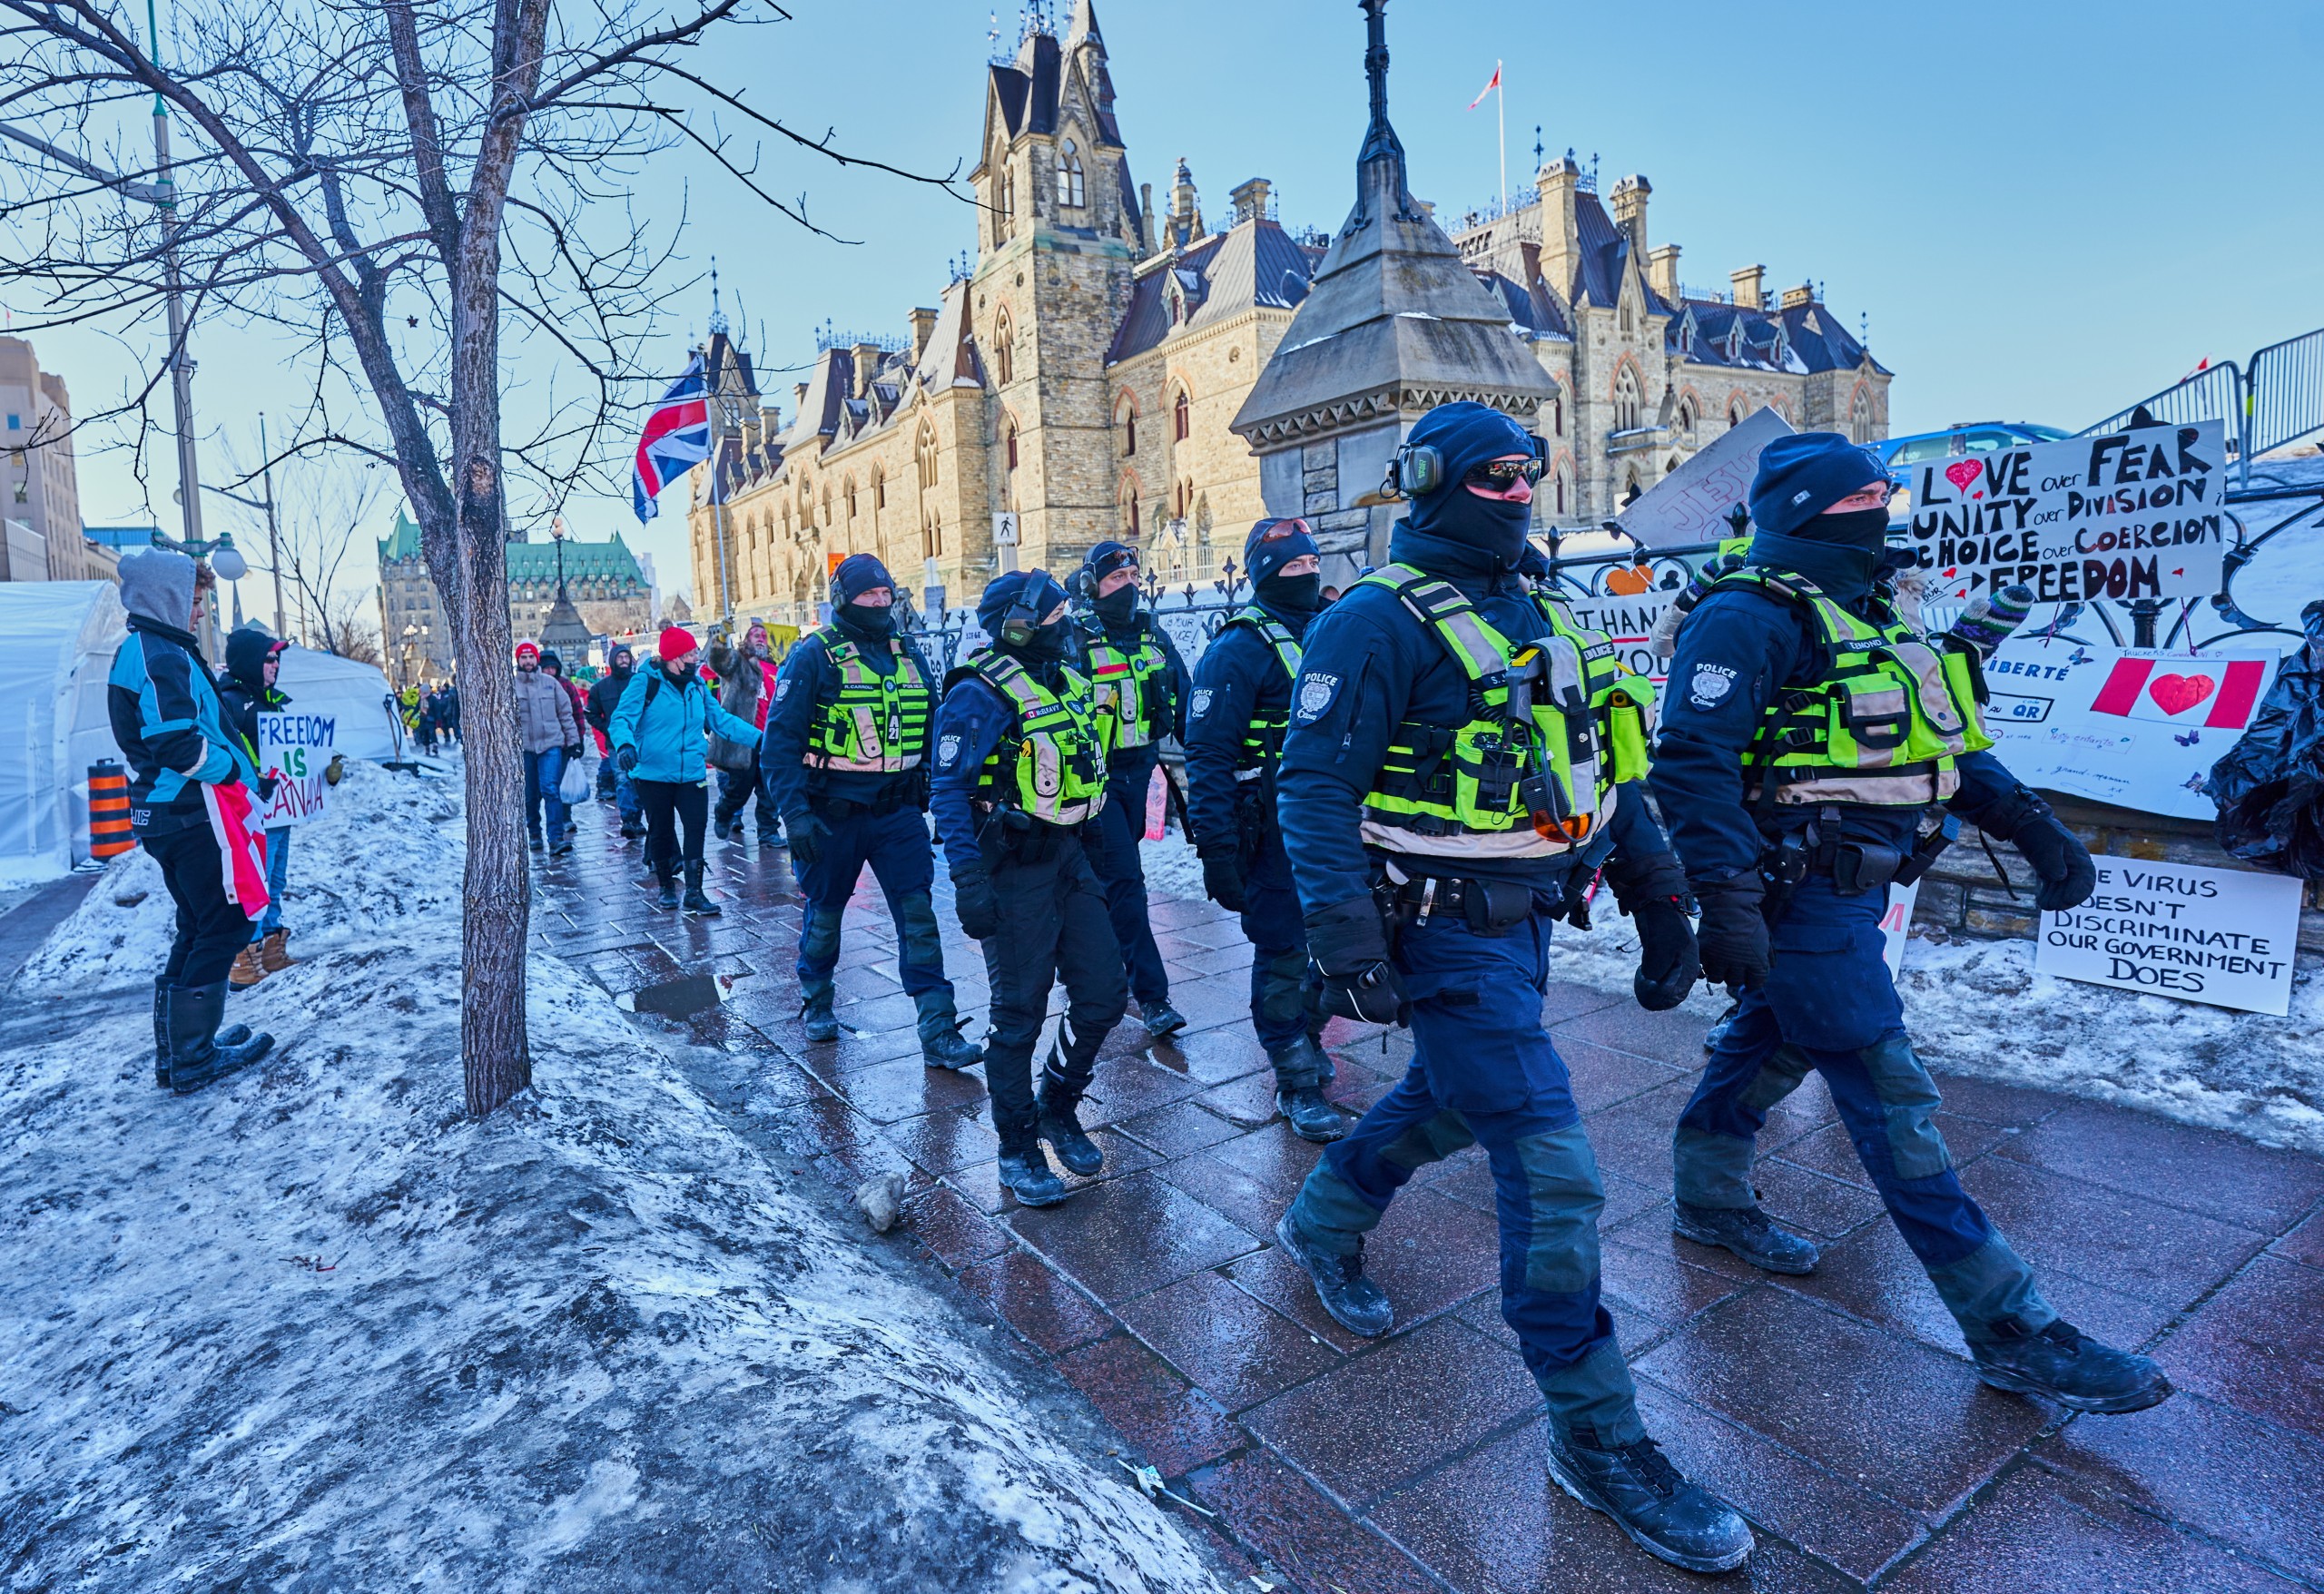 epa09754111 Policemen patrol near Parliament hill as truckers continue to protest in Ottawa, Canada, 13 February 2022. Truckers continue their protest against the mandate by the Canadian government for mandatory vaccines against COVID-19 to be able to return to Canada. A state of emergency was declared in the city of Ottawa on 06 February 2022 and policemen from Ottawa city, Ontario, and the Federal Royal Canadian Mounted Police (RCMP) are deployed.  EPA/VALERIE BLUM